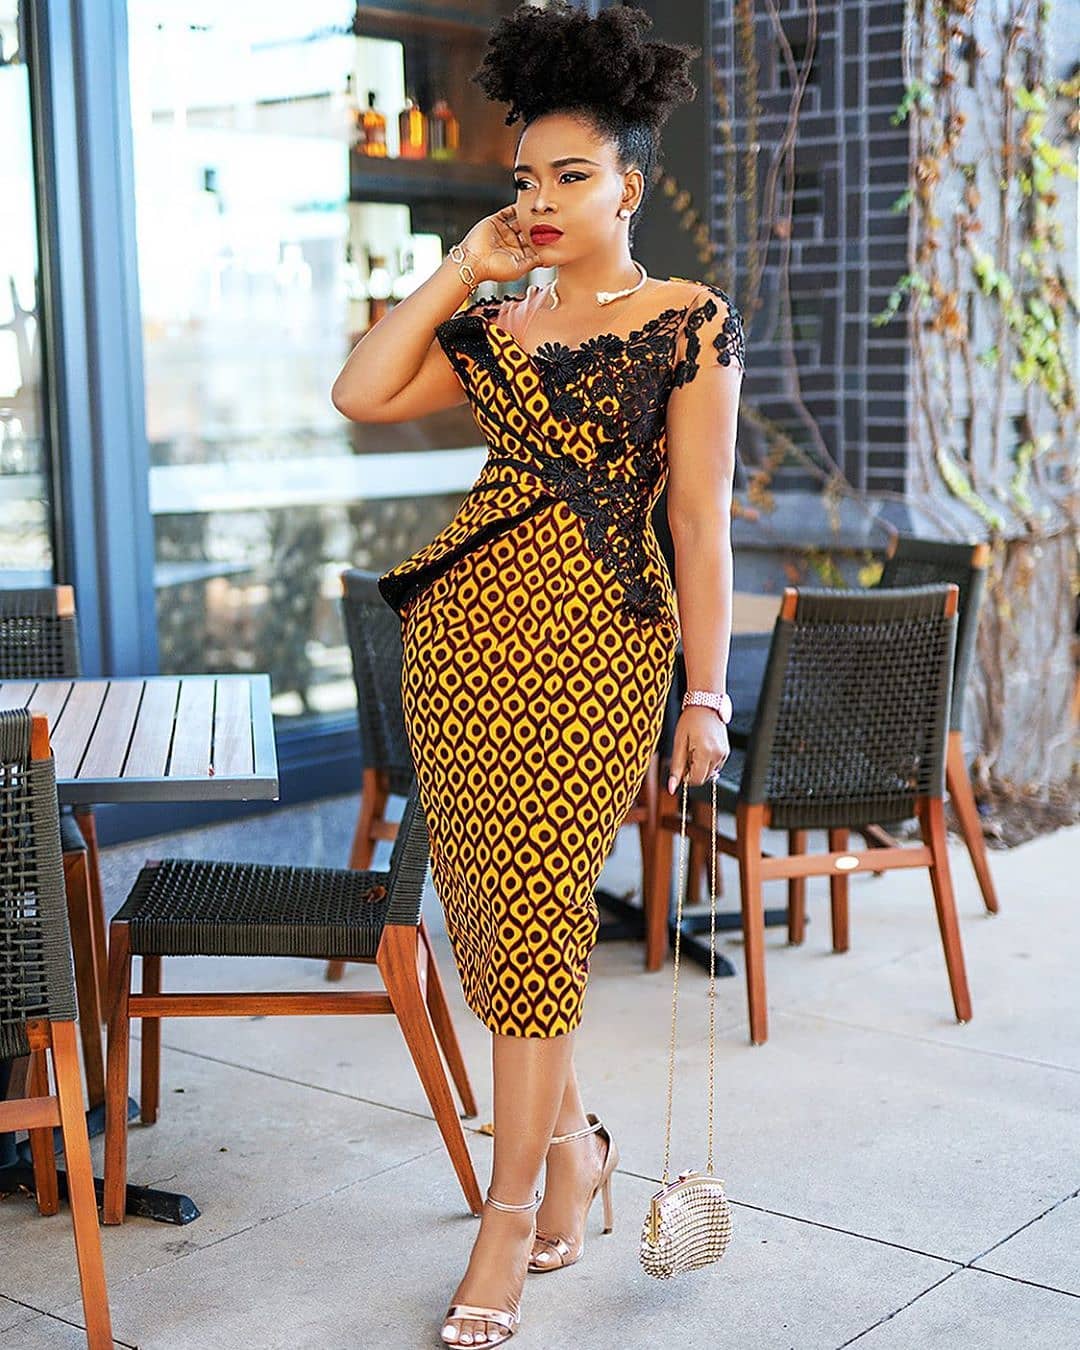 Top 20 Stylish African Print Dresses : Latest Styles For The Beautiful  Ladies, Zaineey…